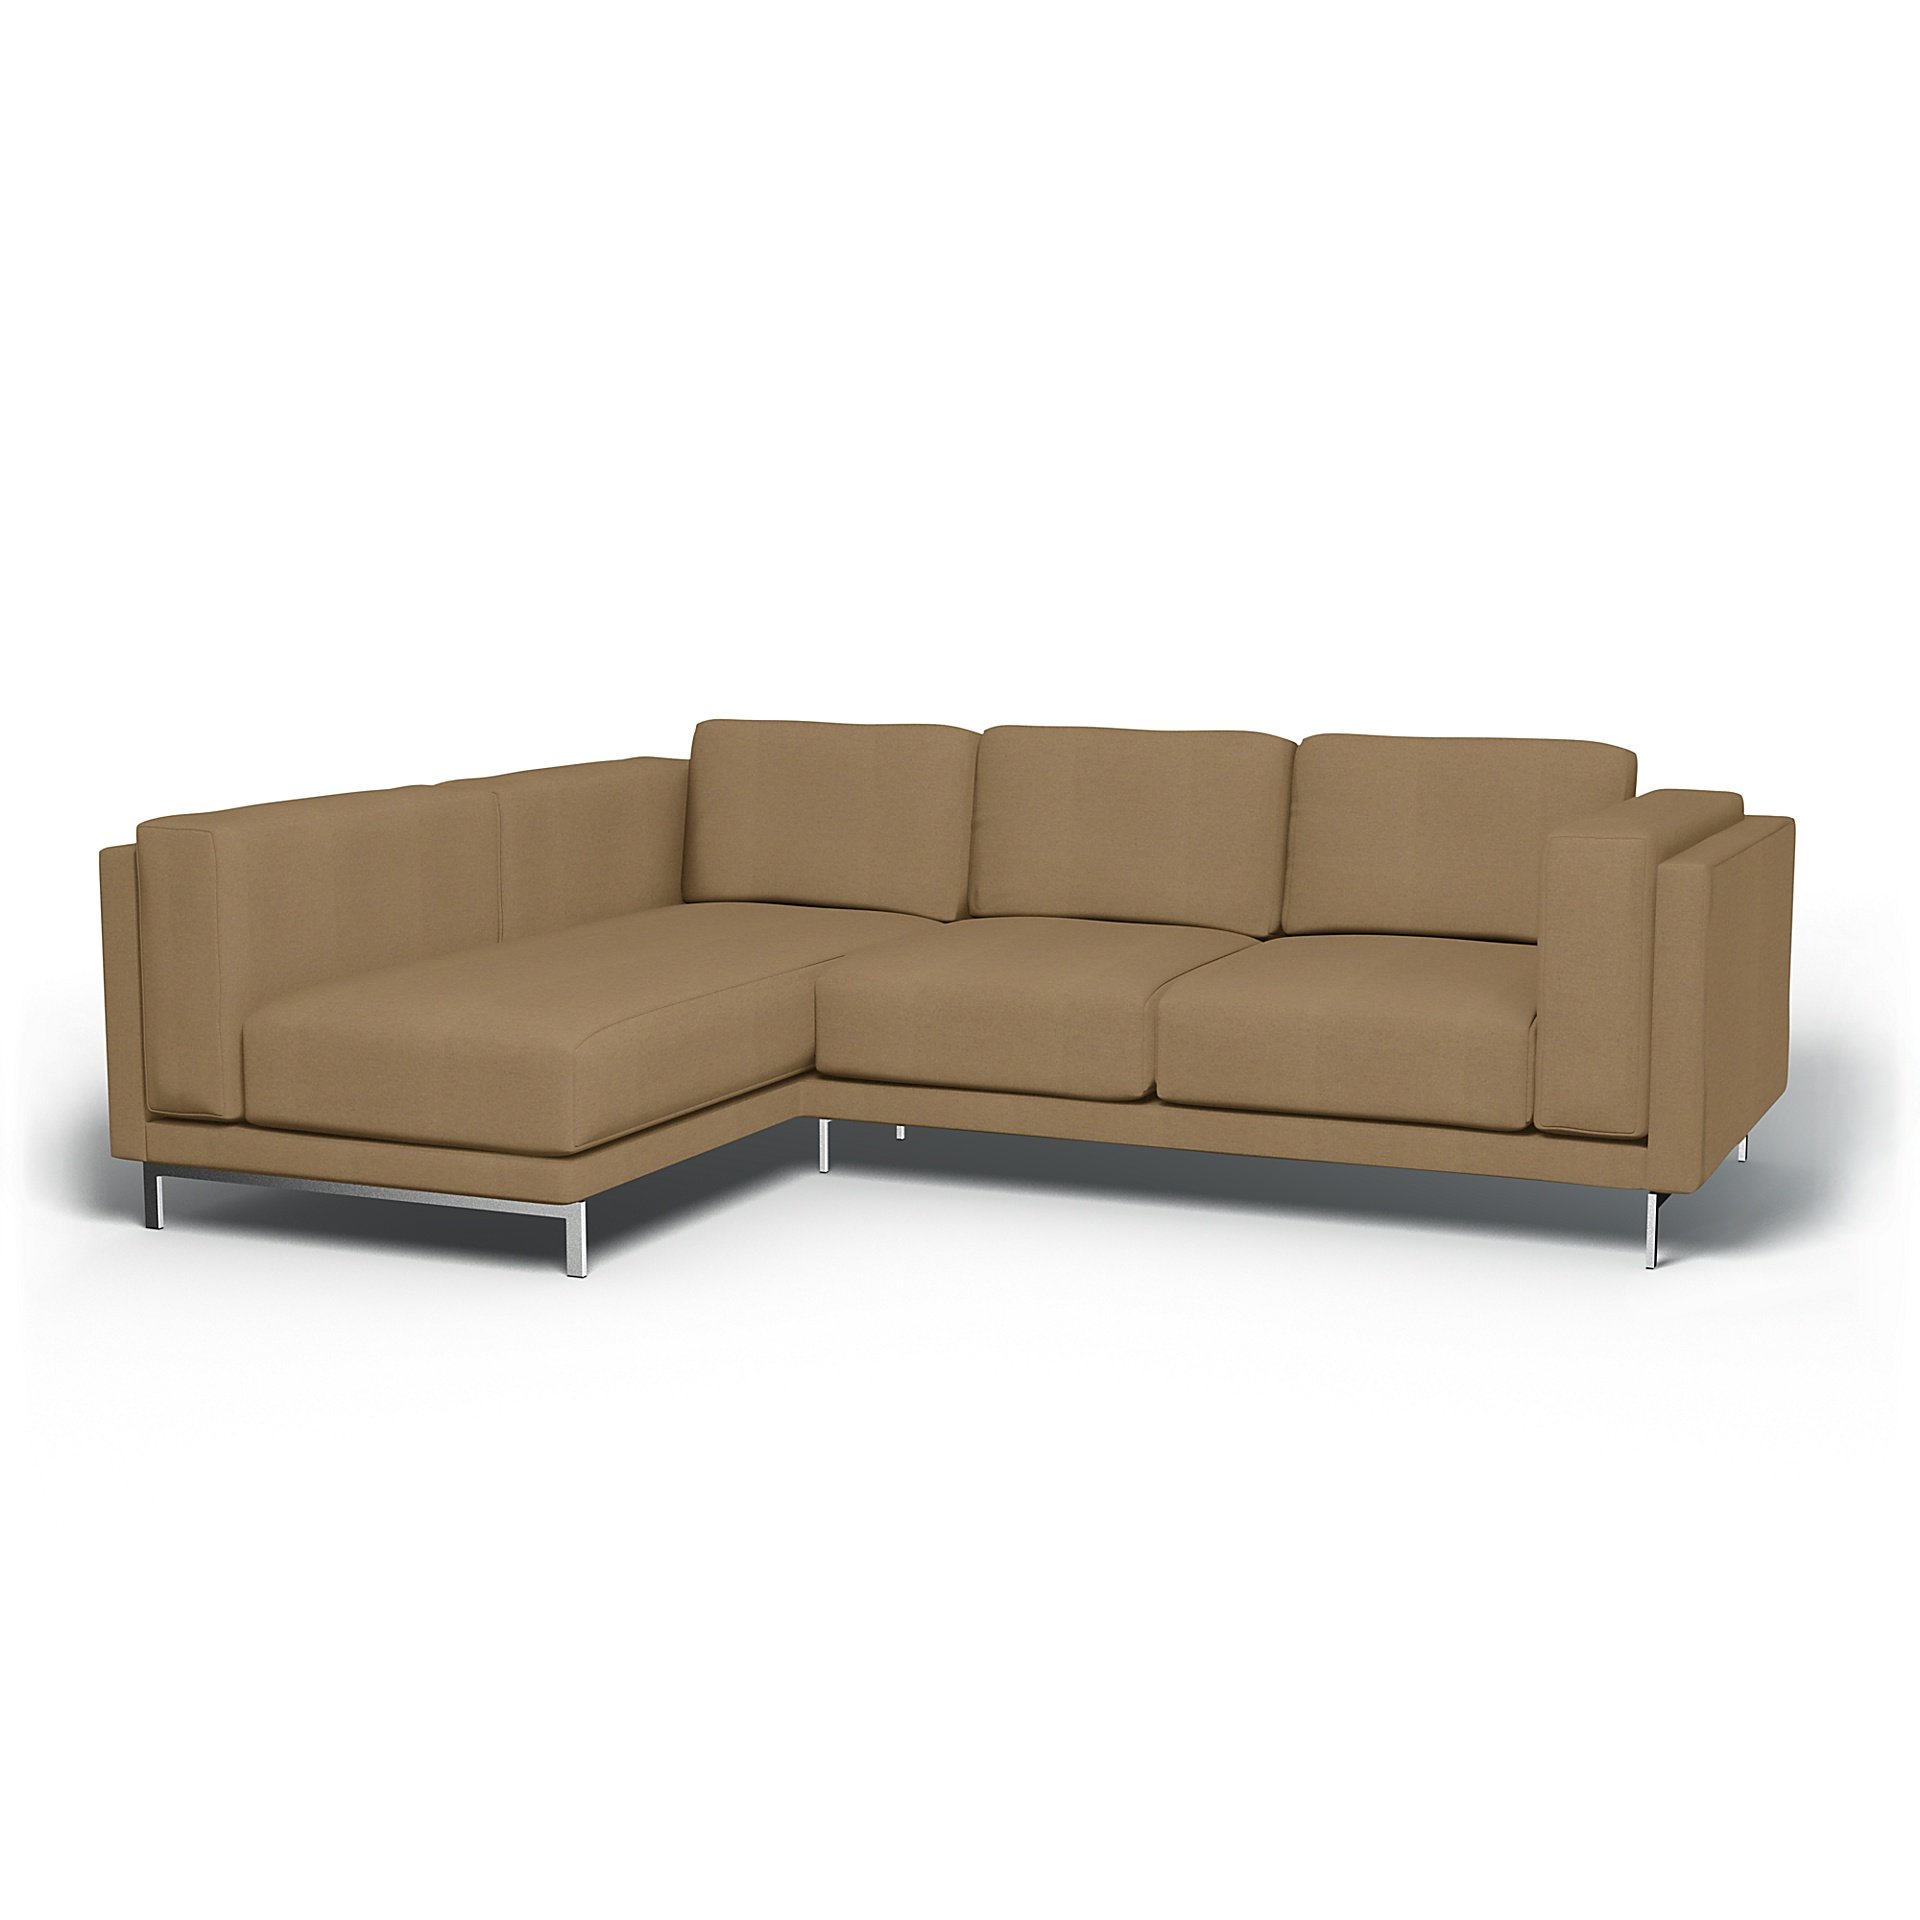 IKEA - Nockeby 3 Seater Sofa with Left Chaise Cover, Sand, Wool - Bemz